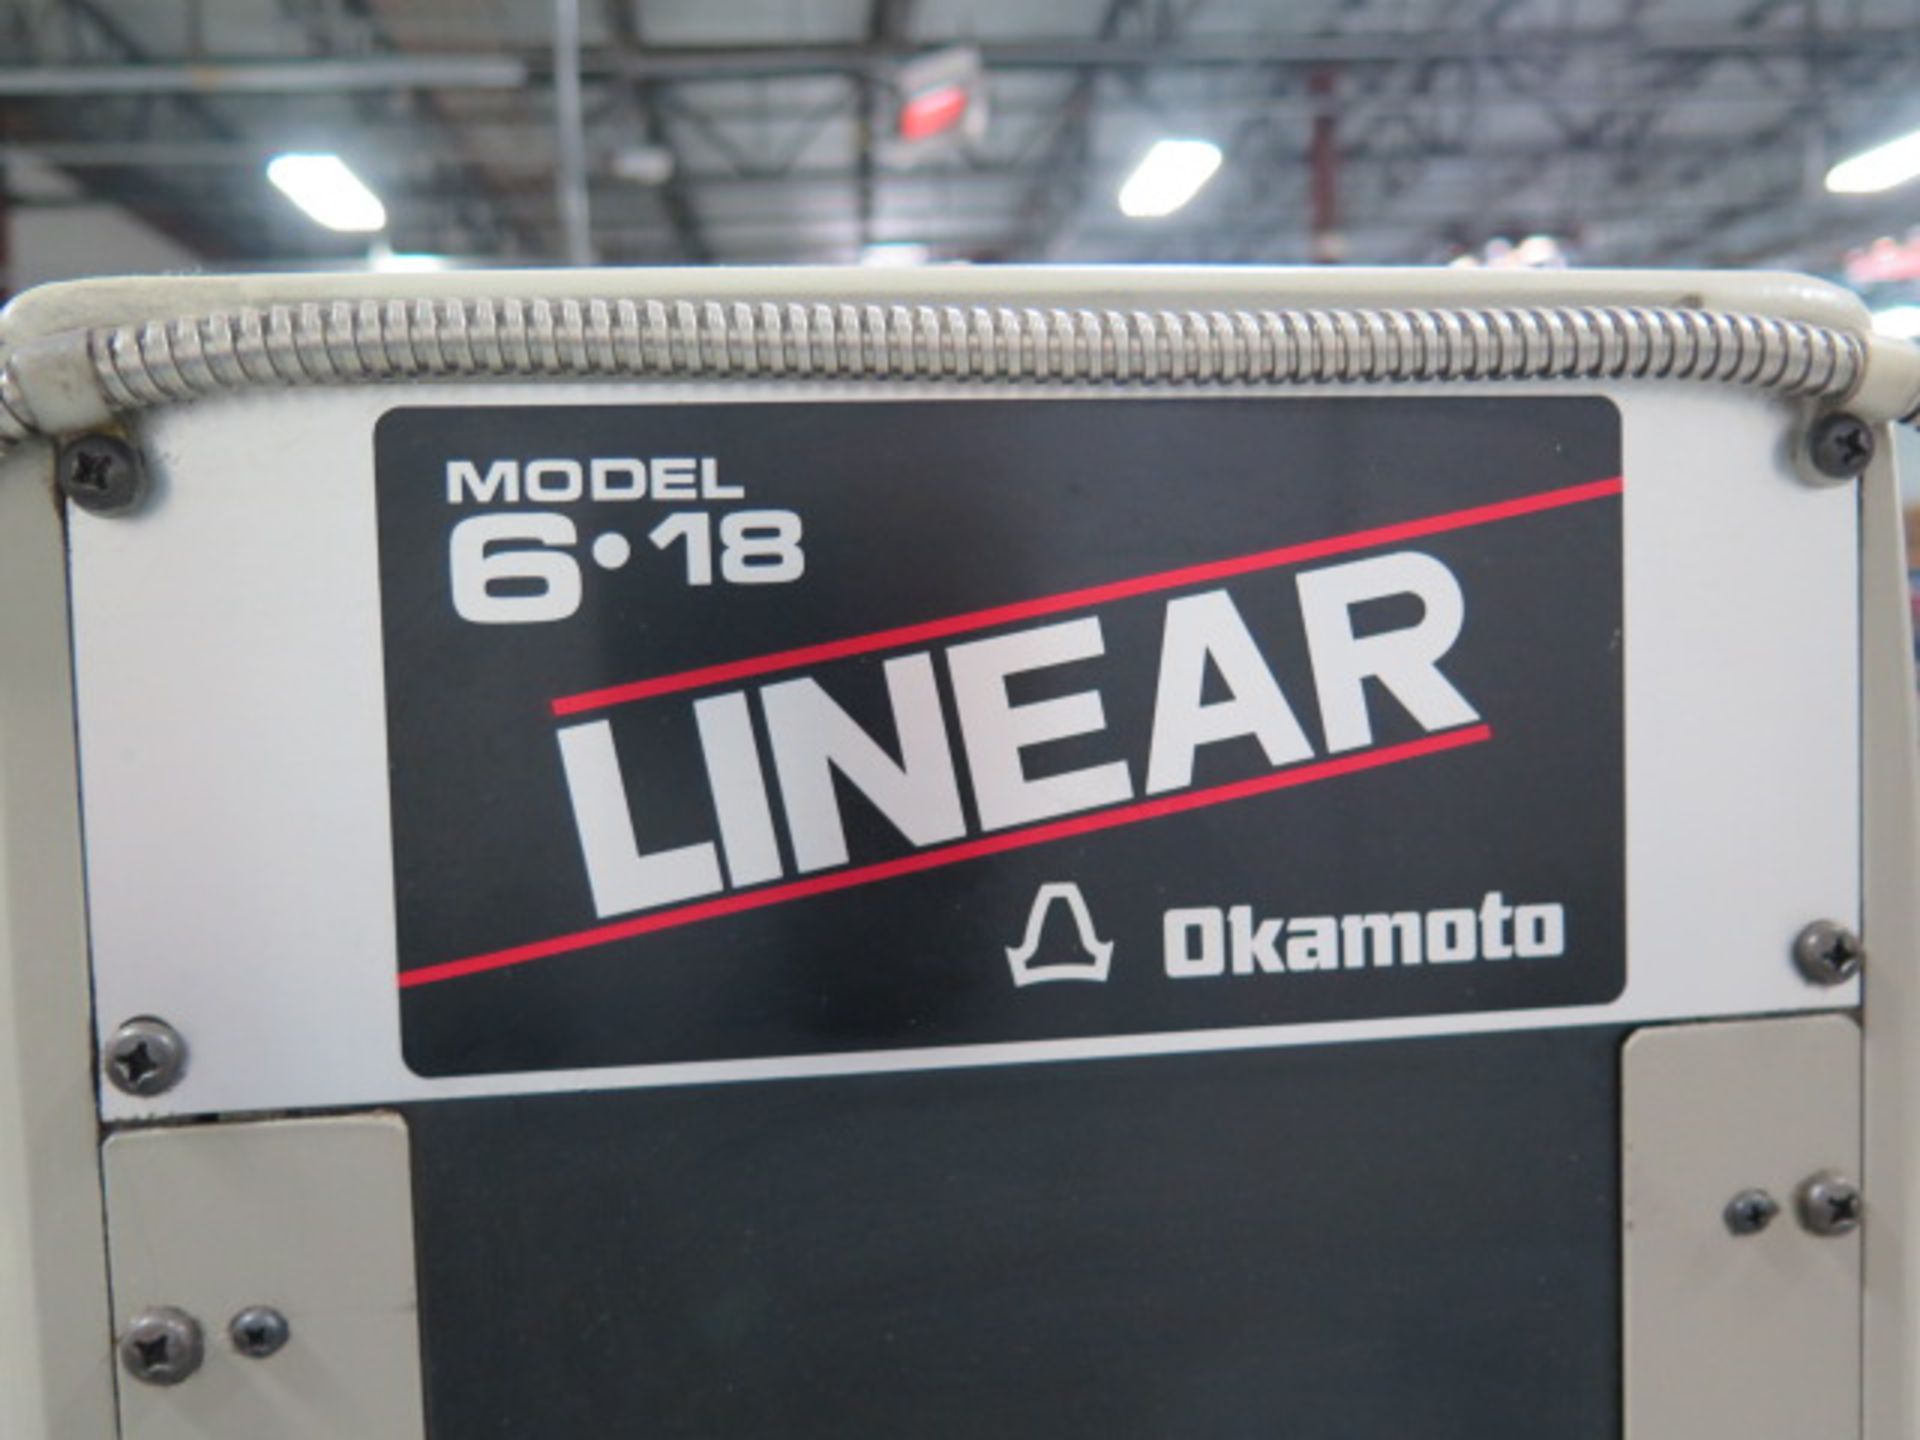 Okamoto “6-18 LINEAR” 6” x 18” Surface Grinder s/n 4469 w/ Mitutoyo UDR-220 Program DRO, SOLD AS IS - Image 14 of 15